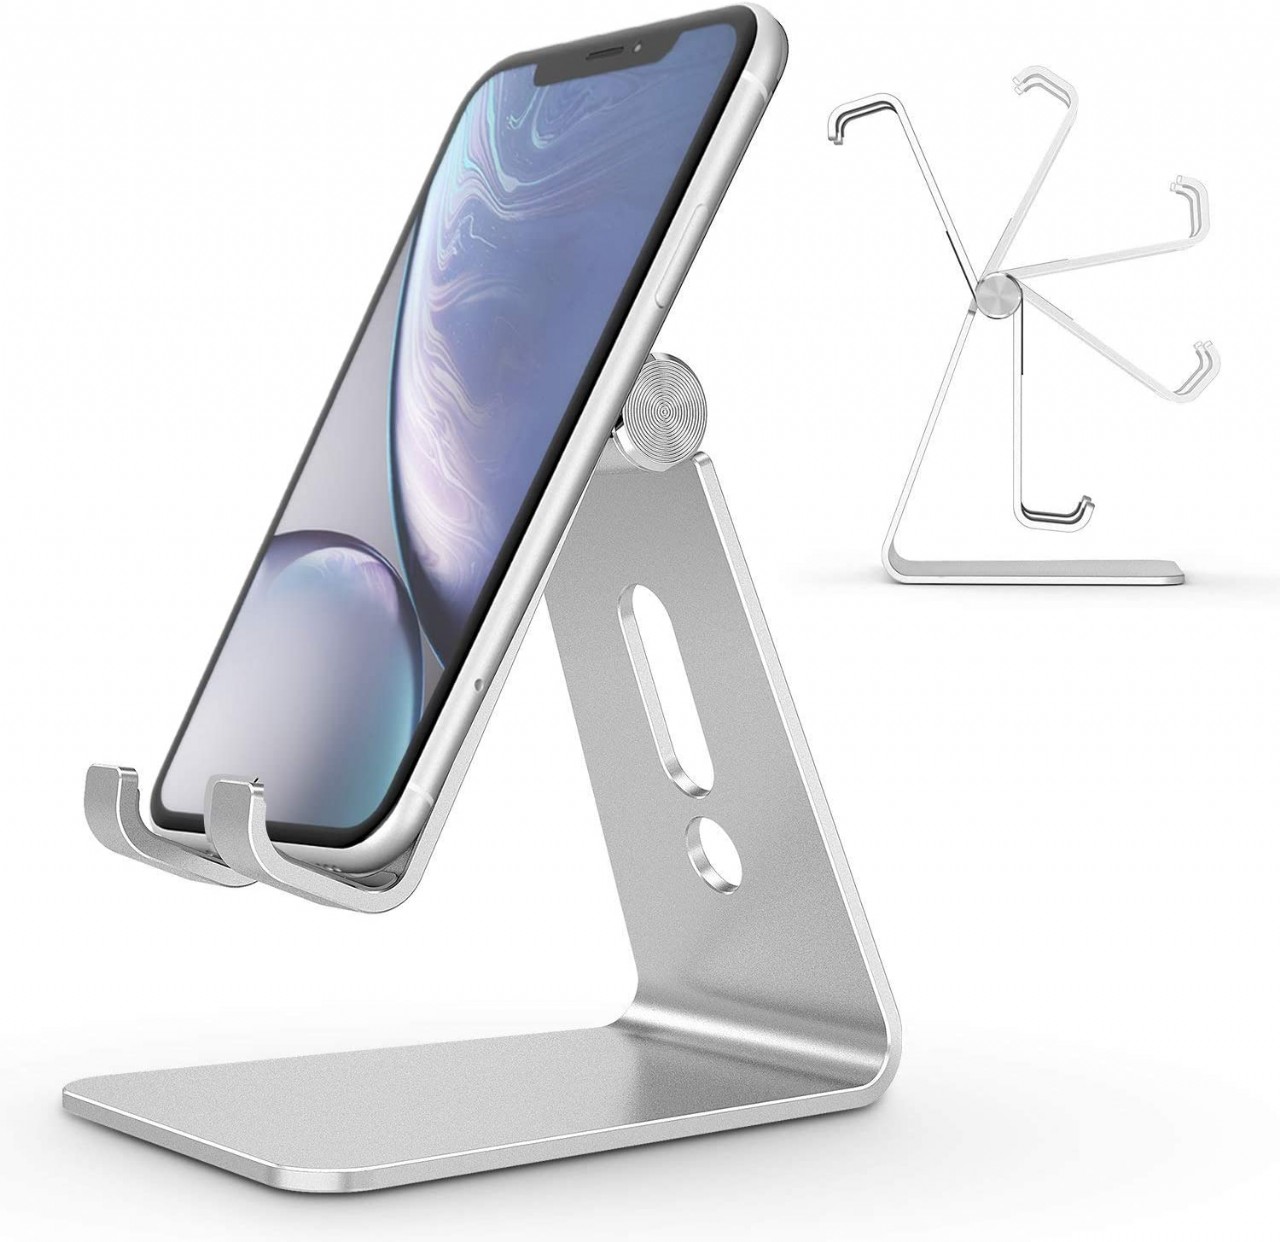 Aluminum Desktop Cellphone Stand with Anti-Slip Base and Convenient Charging Port, Fits All Phone